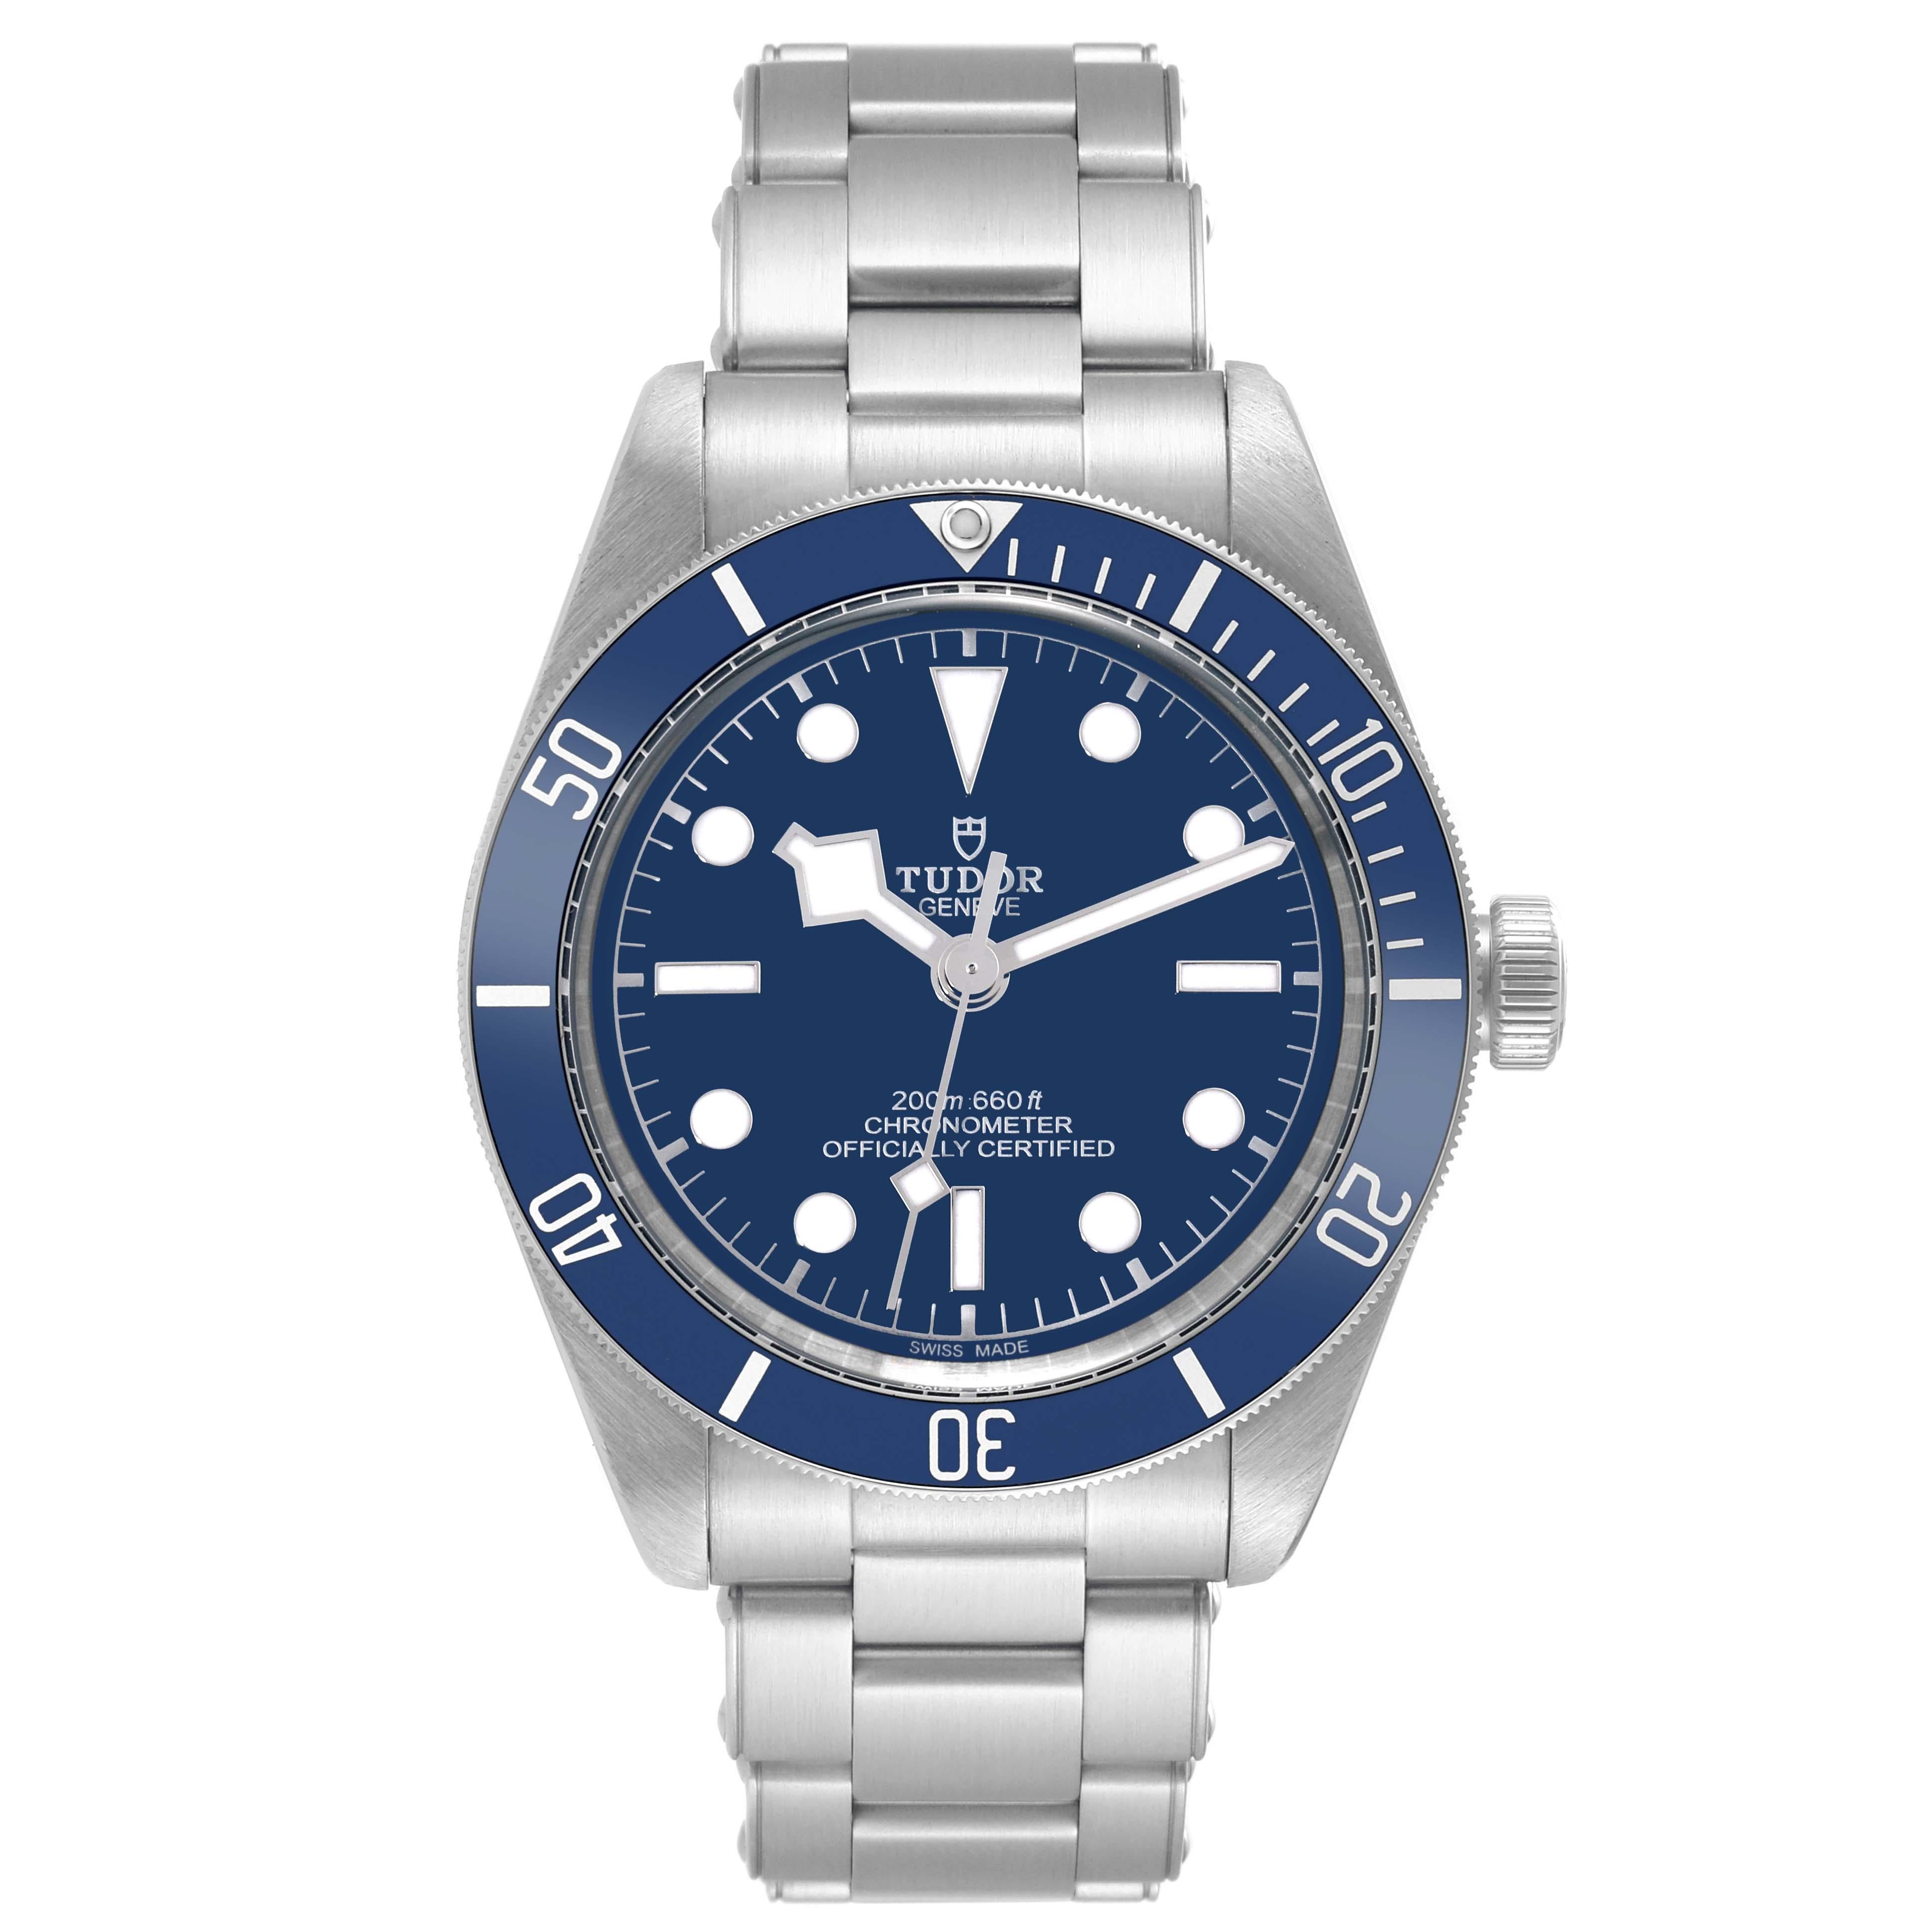 Tudor Heritage Black Bay Fifty-Eight Blue Dial Steel Mens Watch 79030. Automatic self-winding movement. Stainless steel oyster case 39.0 mm in diameter. Tudor rose logo on the crown. Uni-directional rotating stainless steel bezel with a matte blue